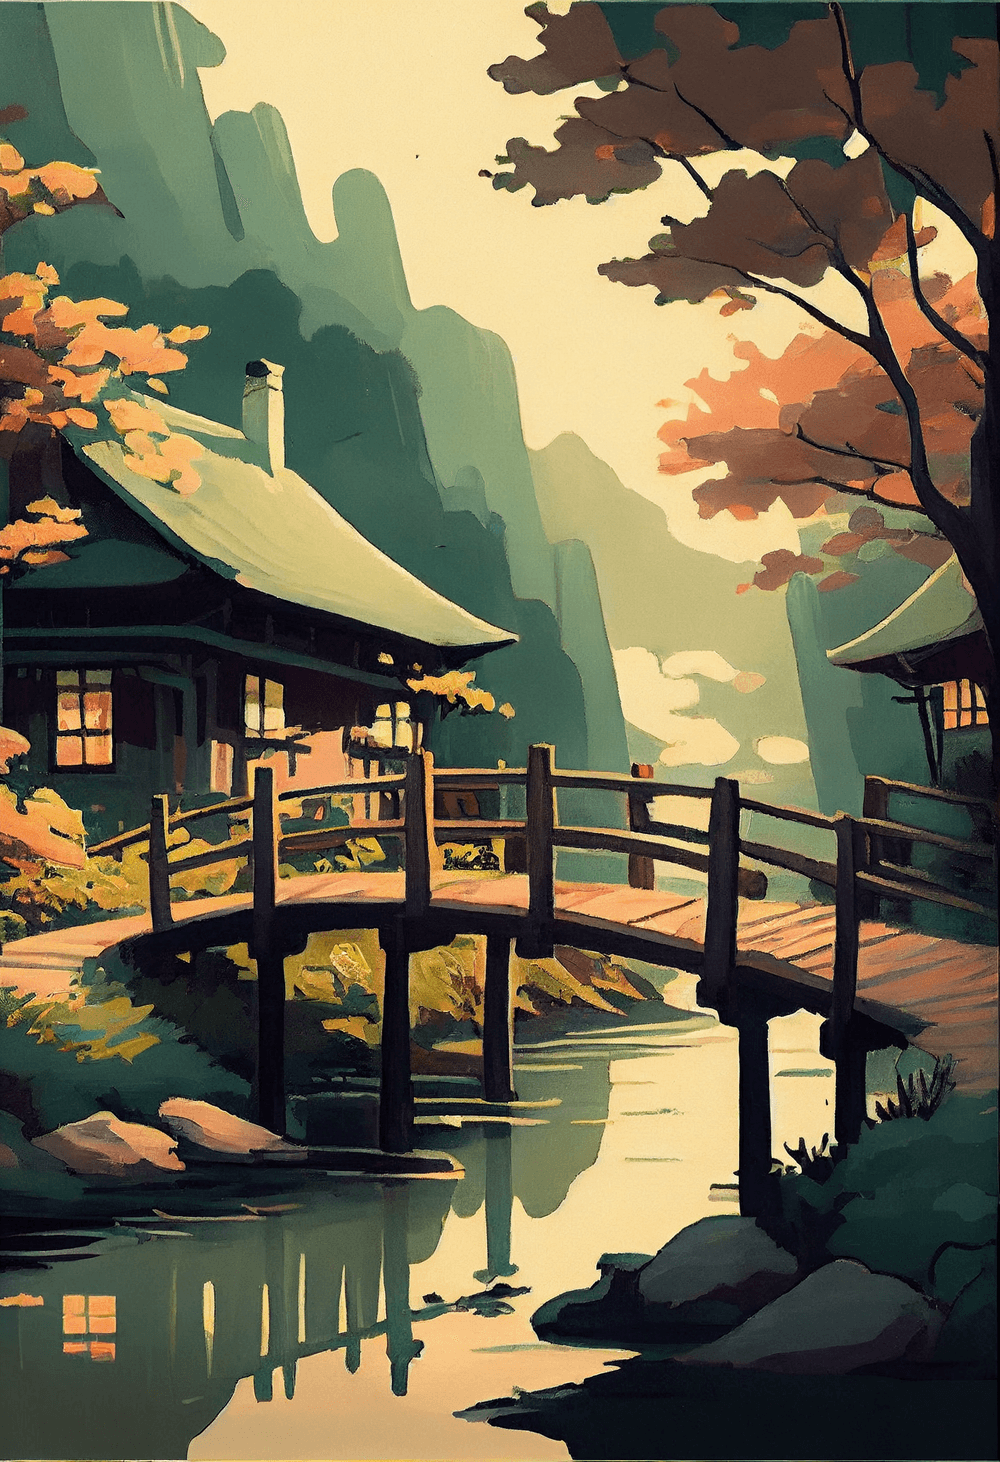 Ancient Landscapes by Fukei #1